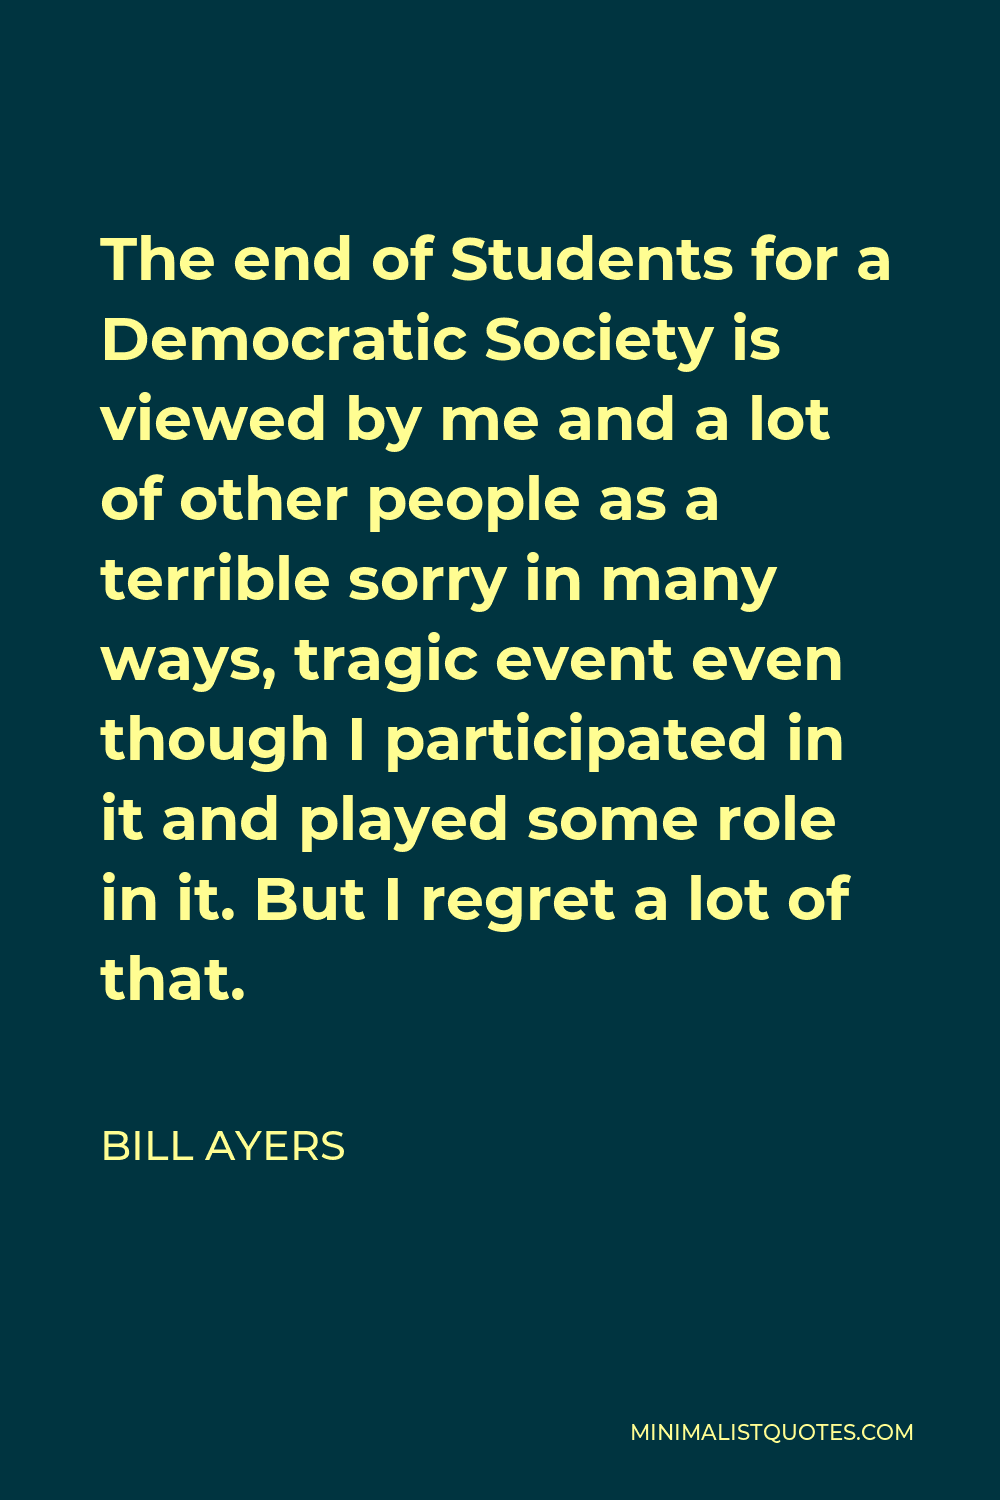 Bill Ayers Quote - The end of Students for a Democratic Society is viewed by me and a lot of other people as a terrible sorry in many ways, tragic event even though I participated in it and played some role in it. But I regret a lot of that.